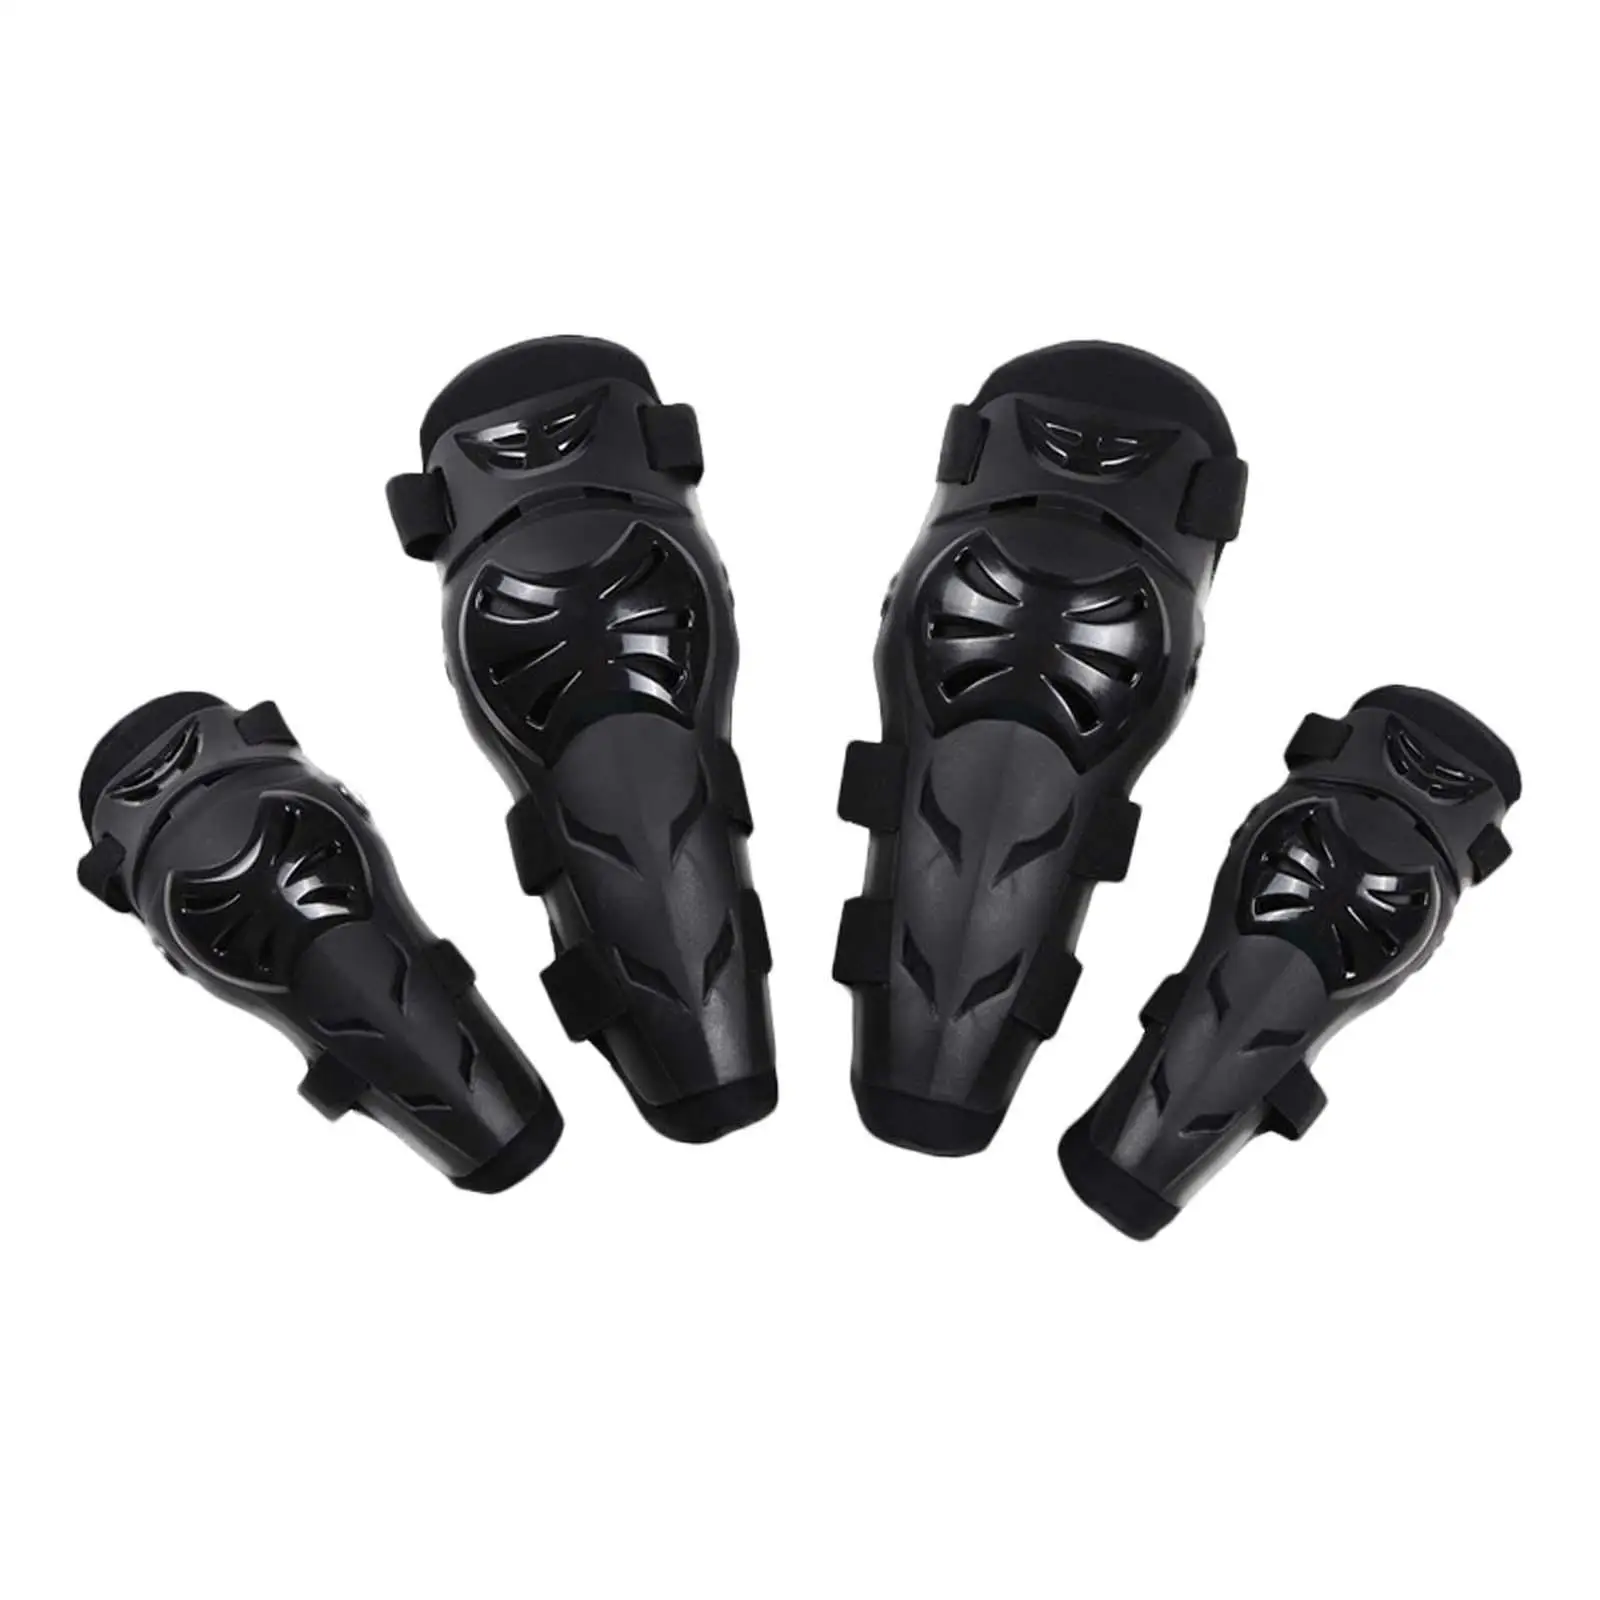 4Pcs Motocross Elbow Knee Shin Guards Shell Protector Flexible Cusion Elbow Knee Pads for Skating Sport Cycling Motocross